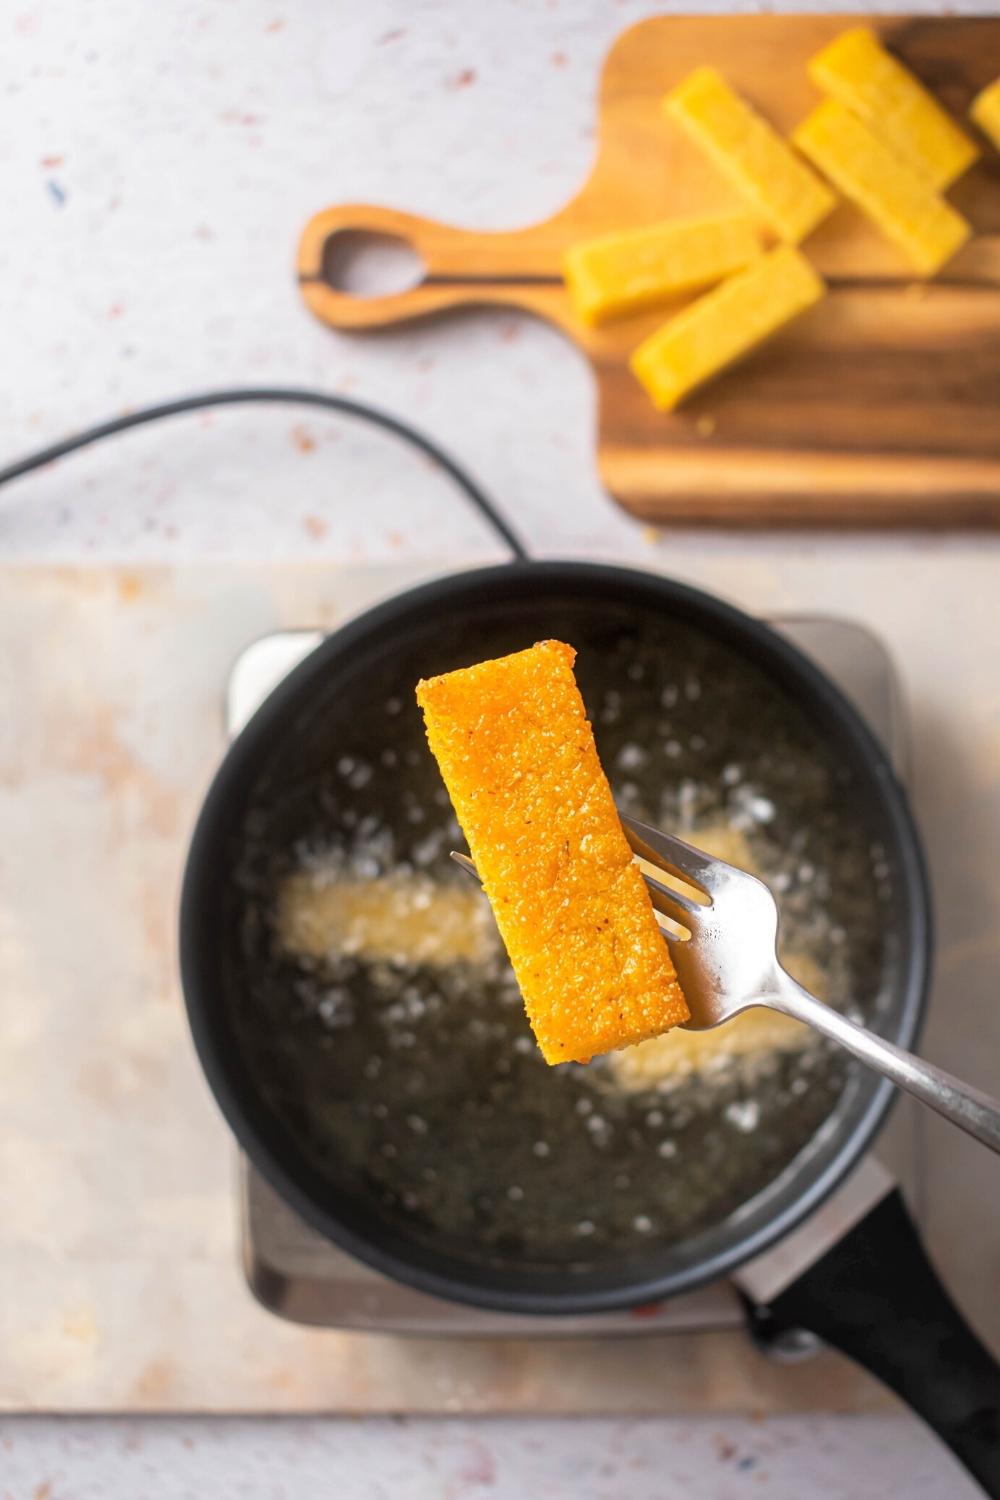 A fried polenta stick on the prongs of a fork hovering over a pan filled with oil and a couple pieces of polenta.